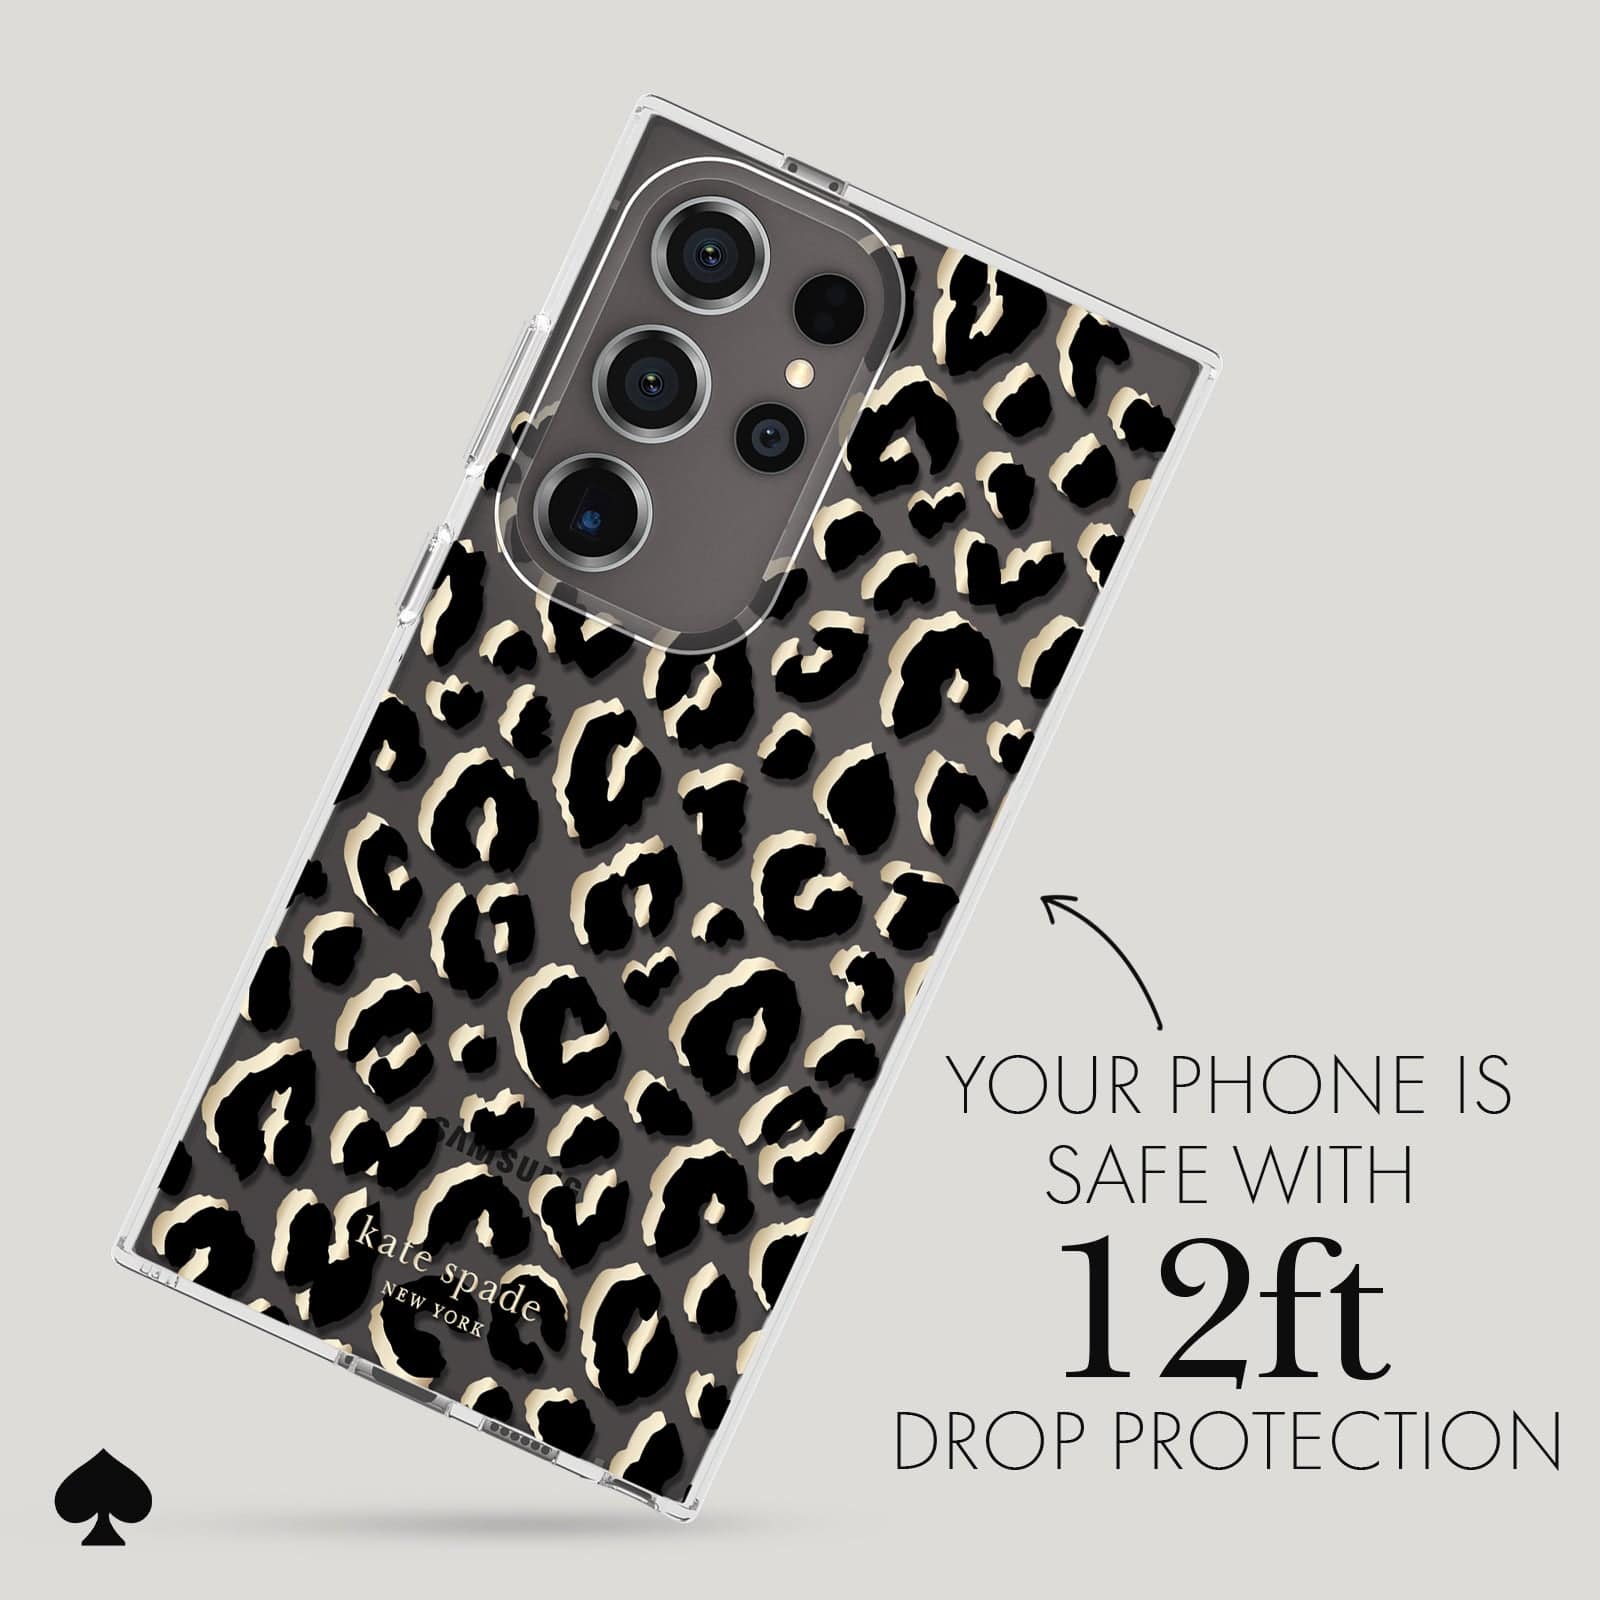 YOUR PHONE IS SAFE WITH 12FT DROP PROTECTION